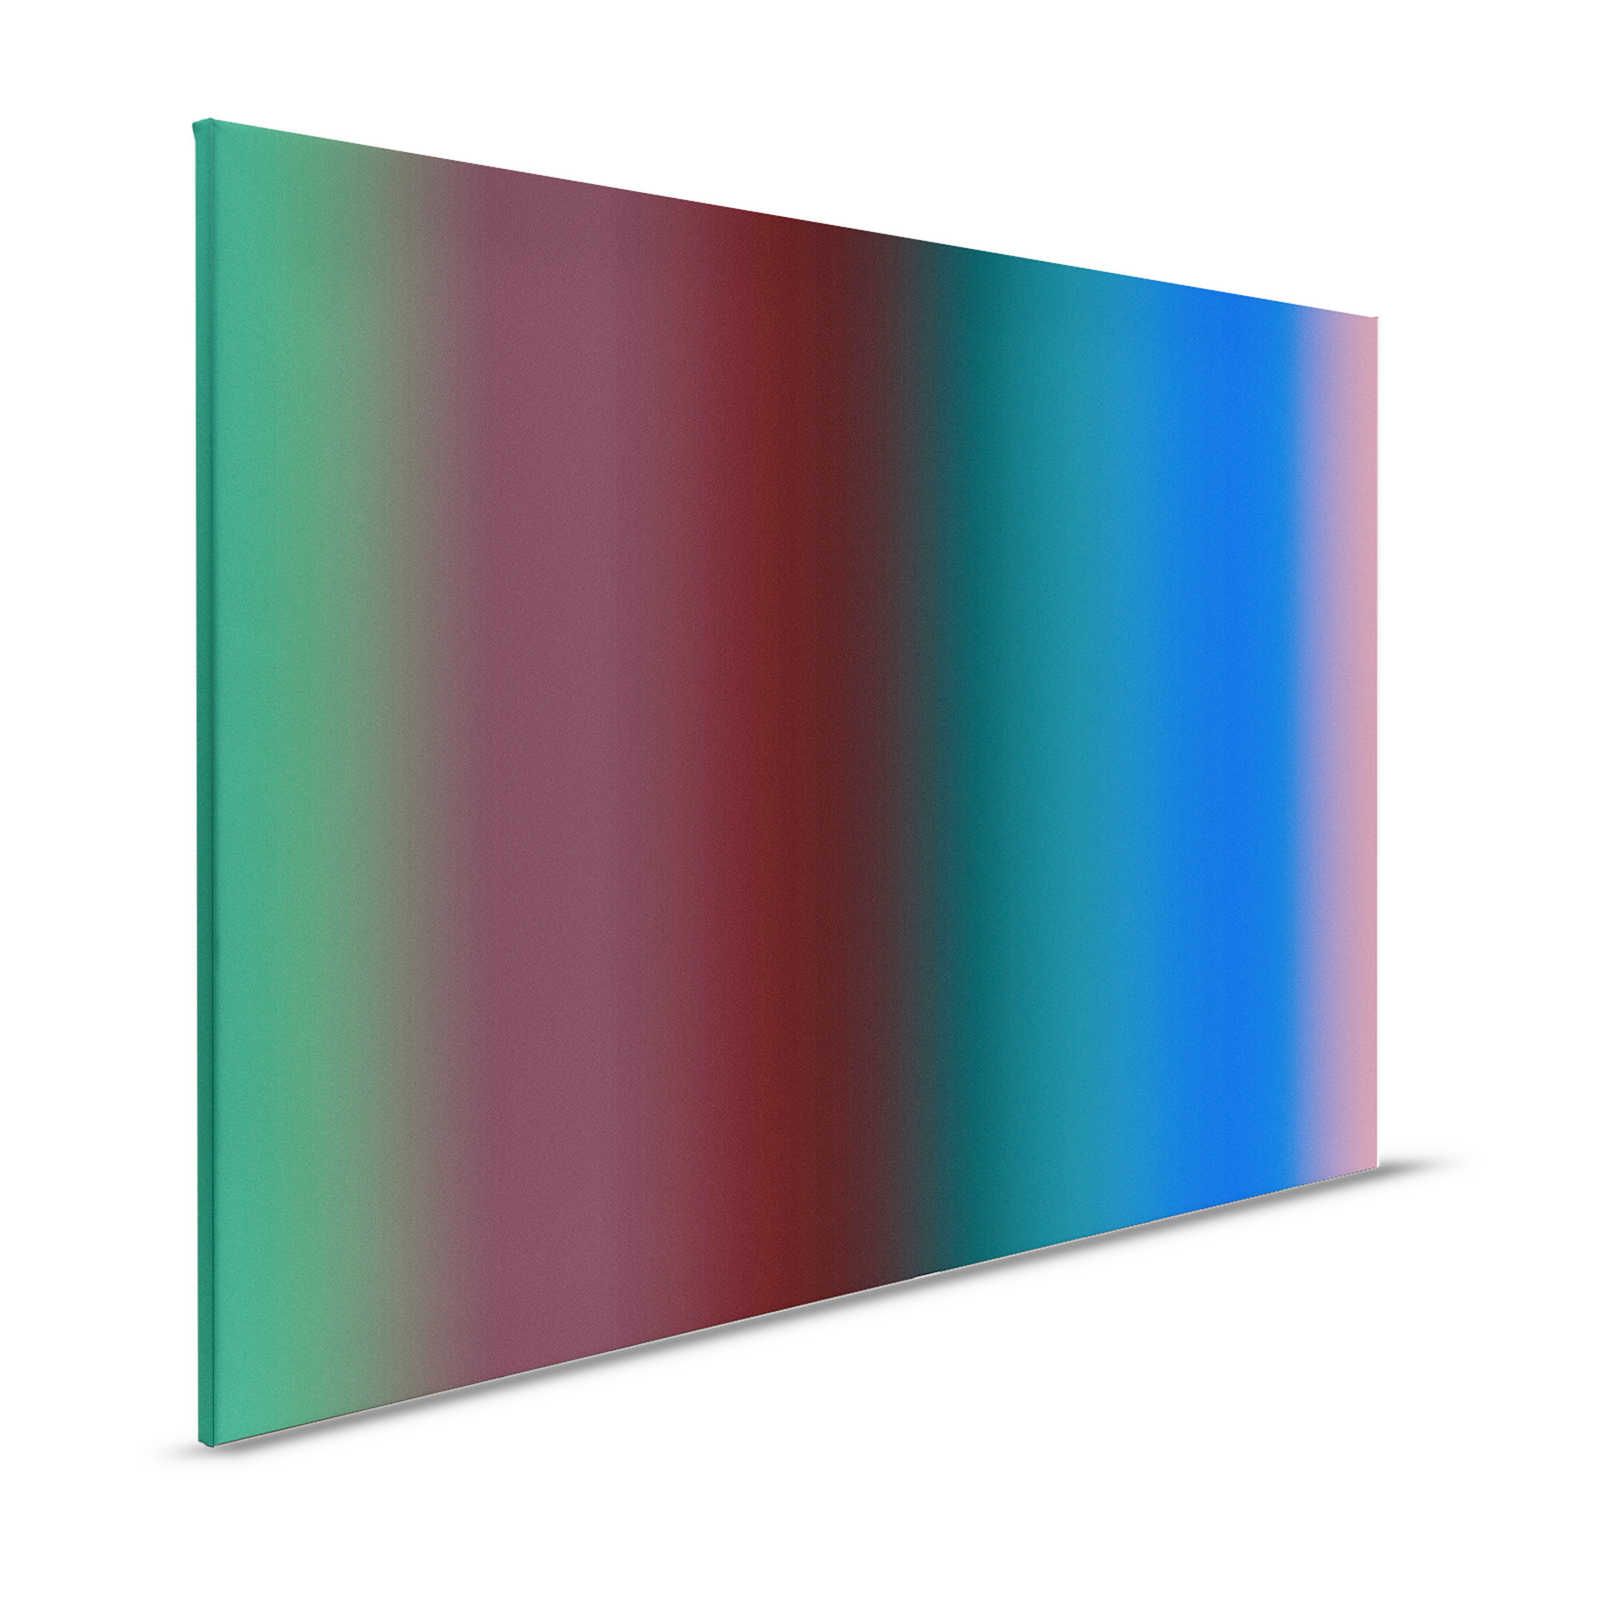 Over the Rainbow 2 - Gradient Canvas Painting Colourful Stripe Design - 1.20 m x 0.80 m
